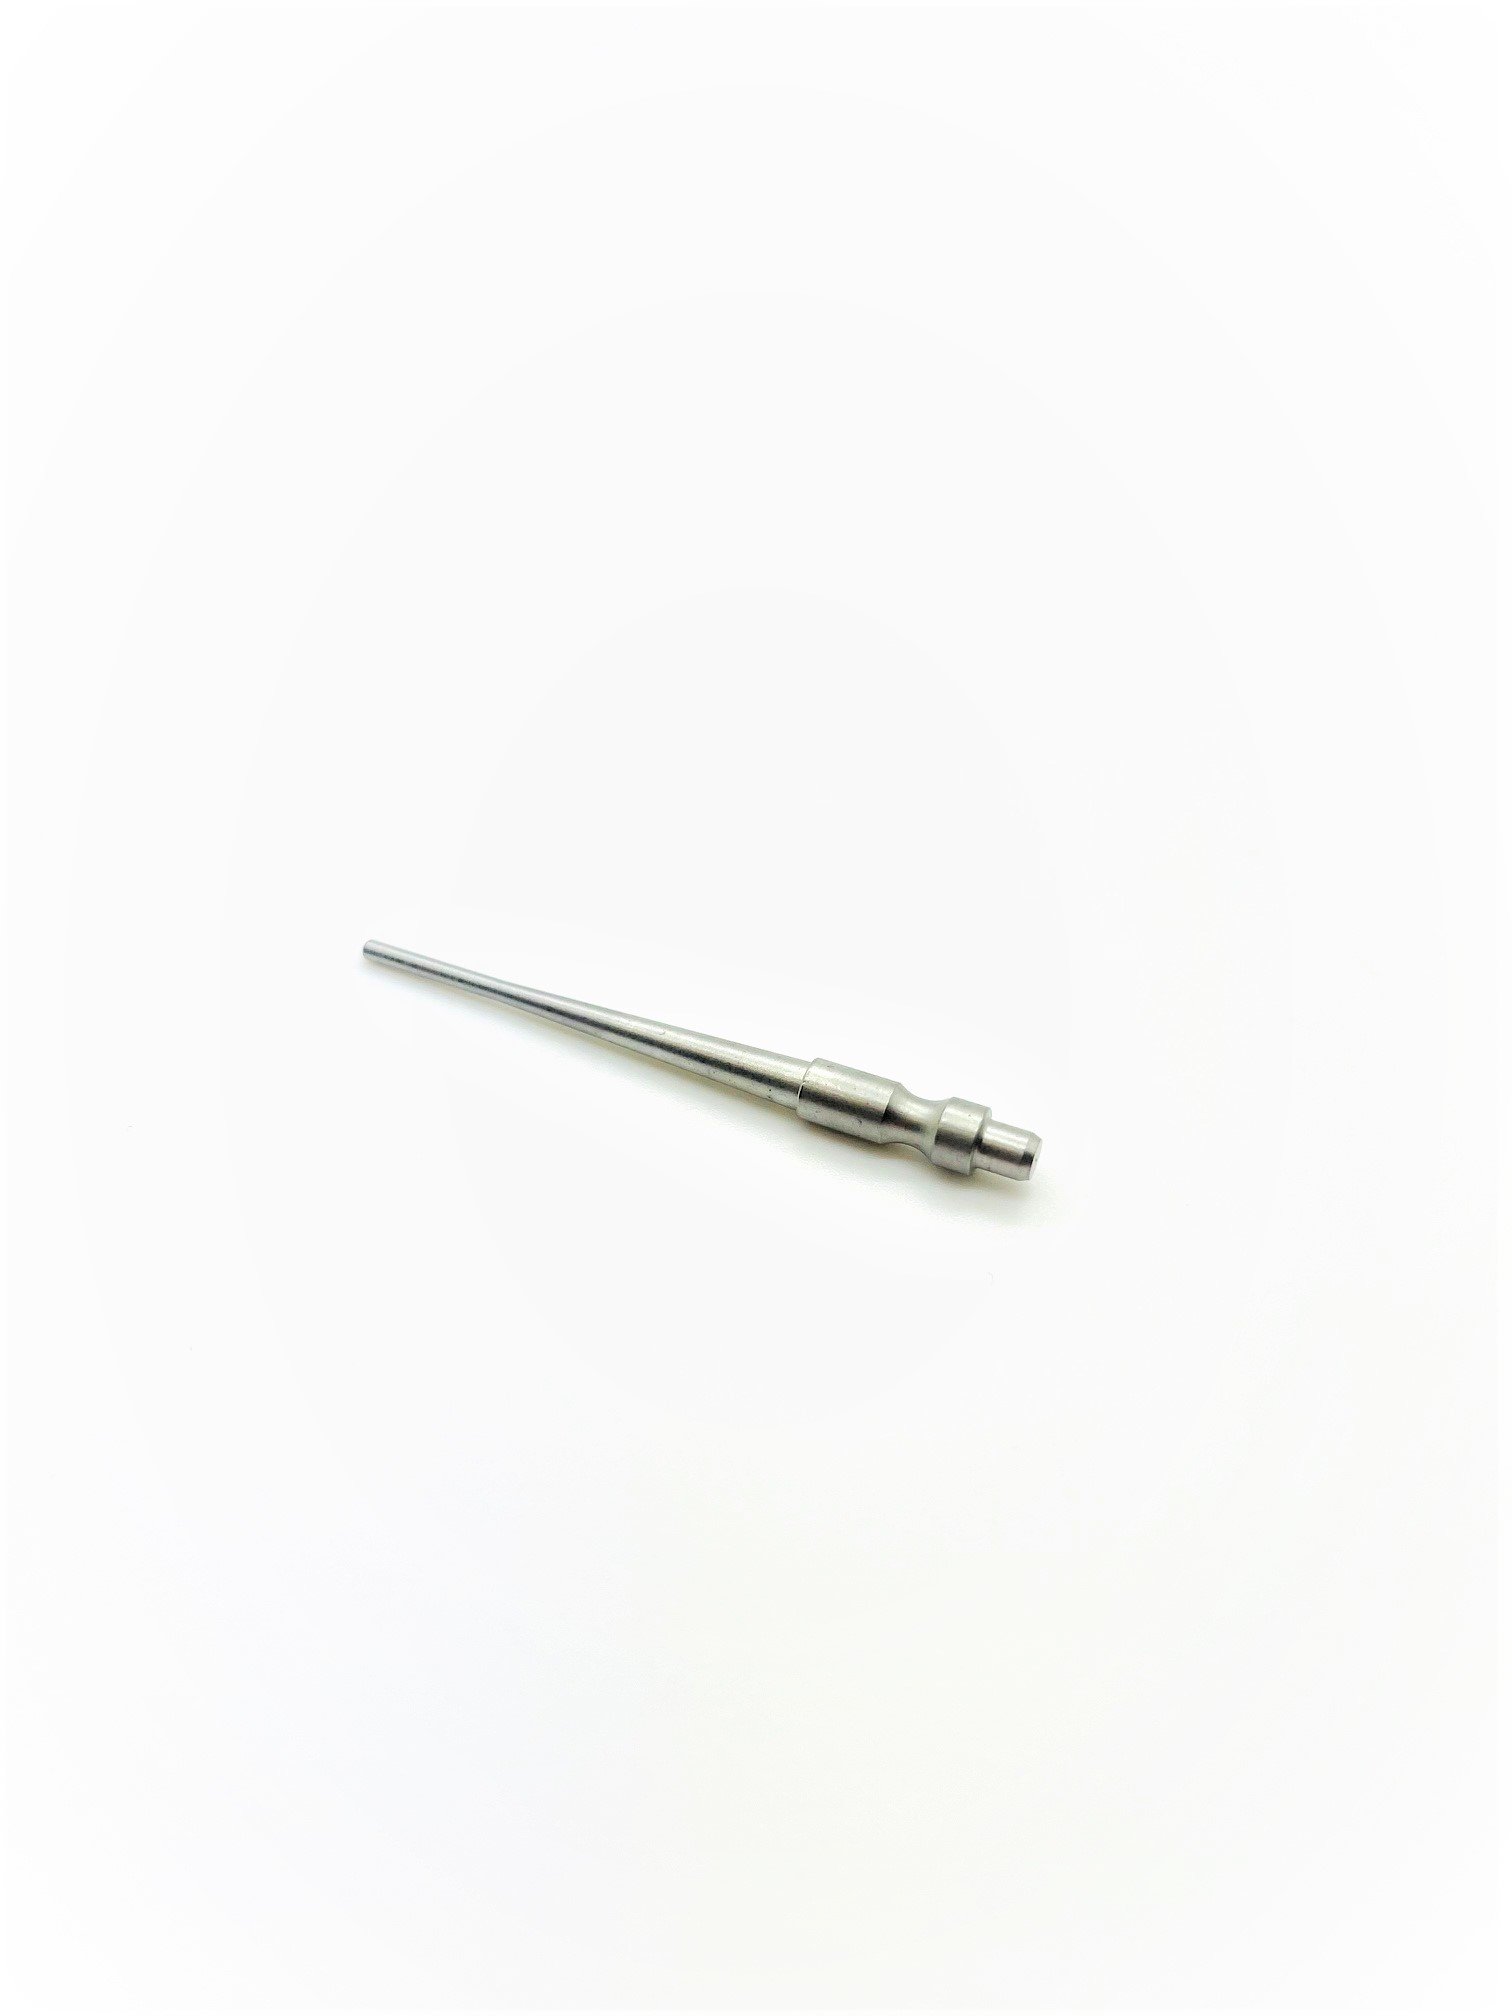 Firing Pin Stainless steel For all Calibers